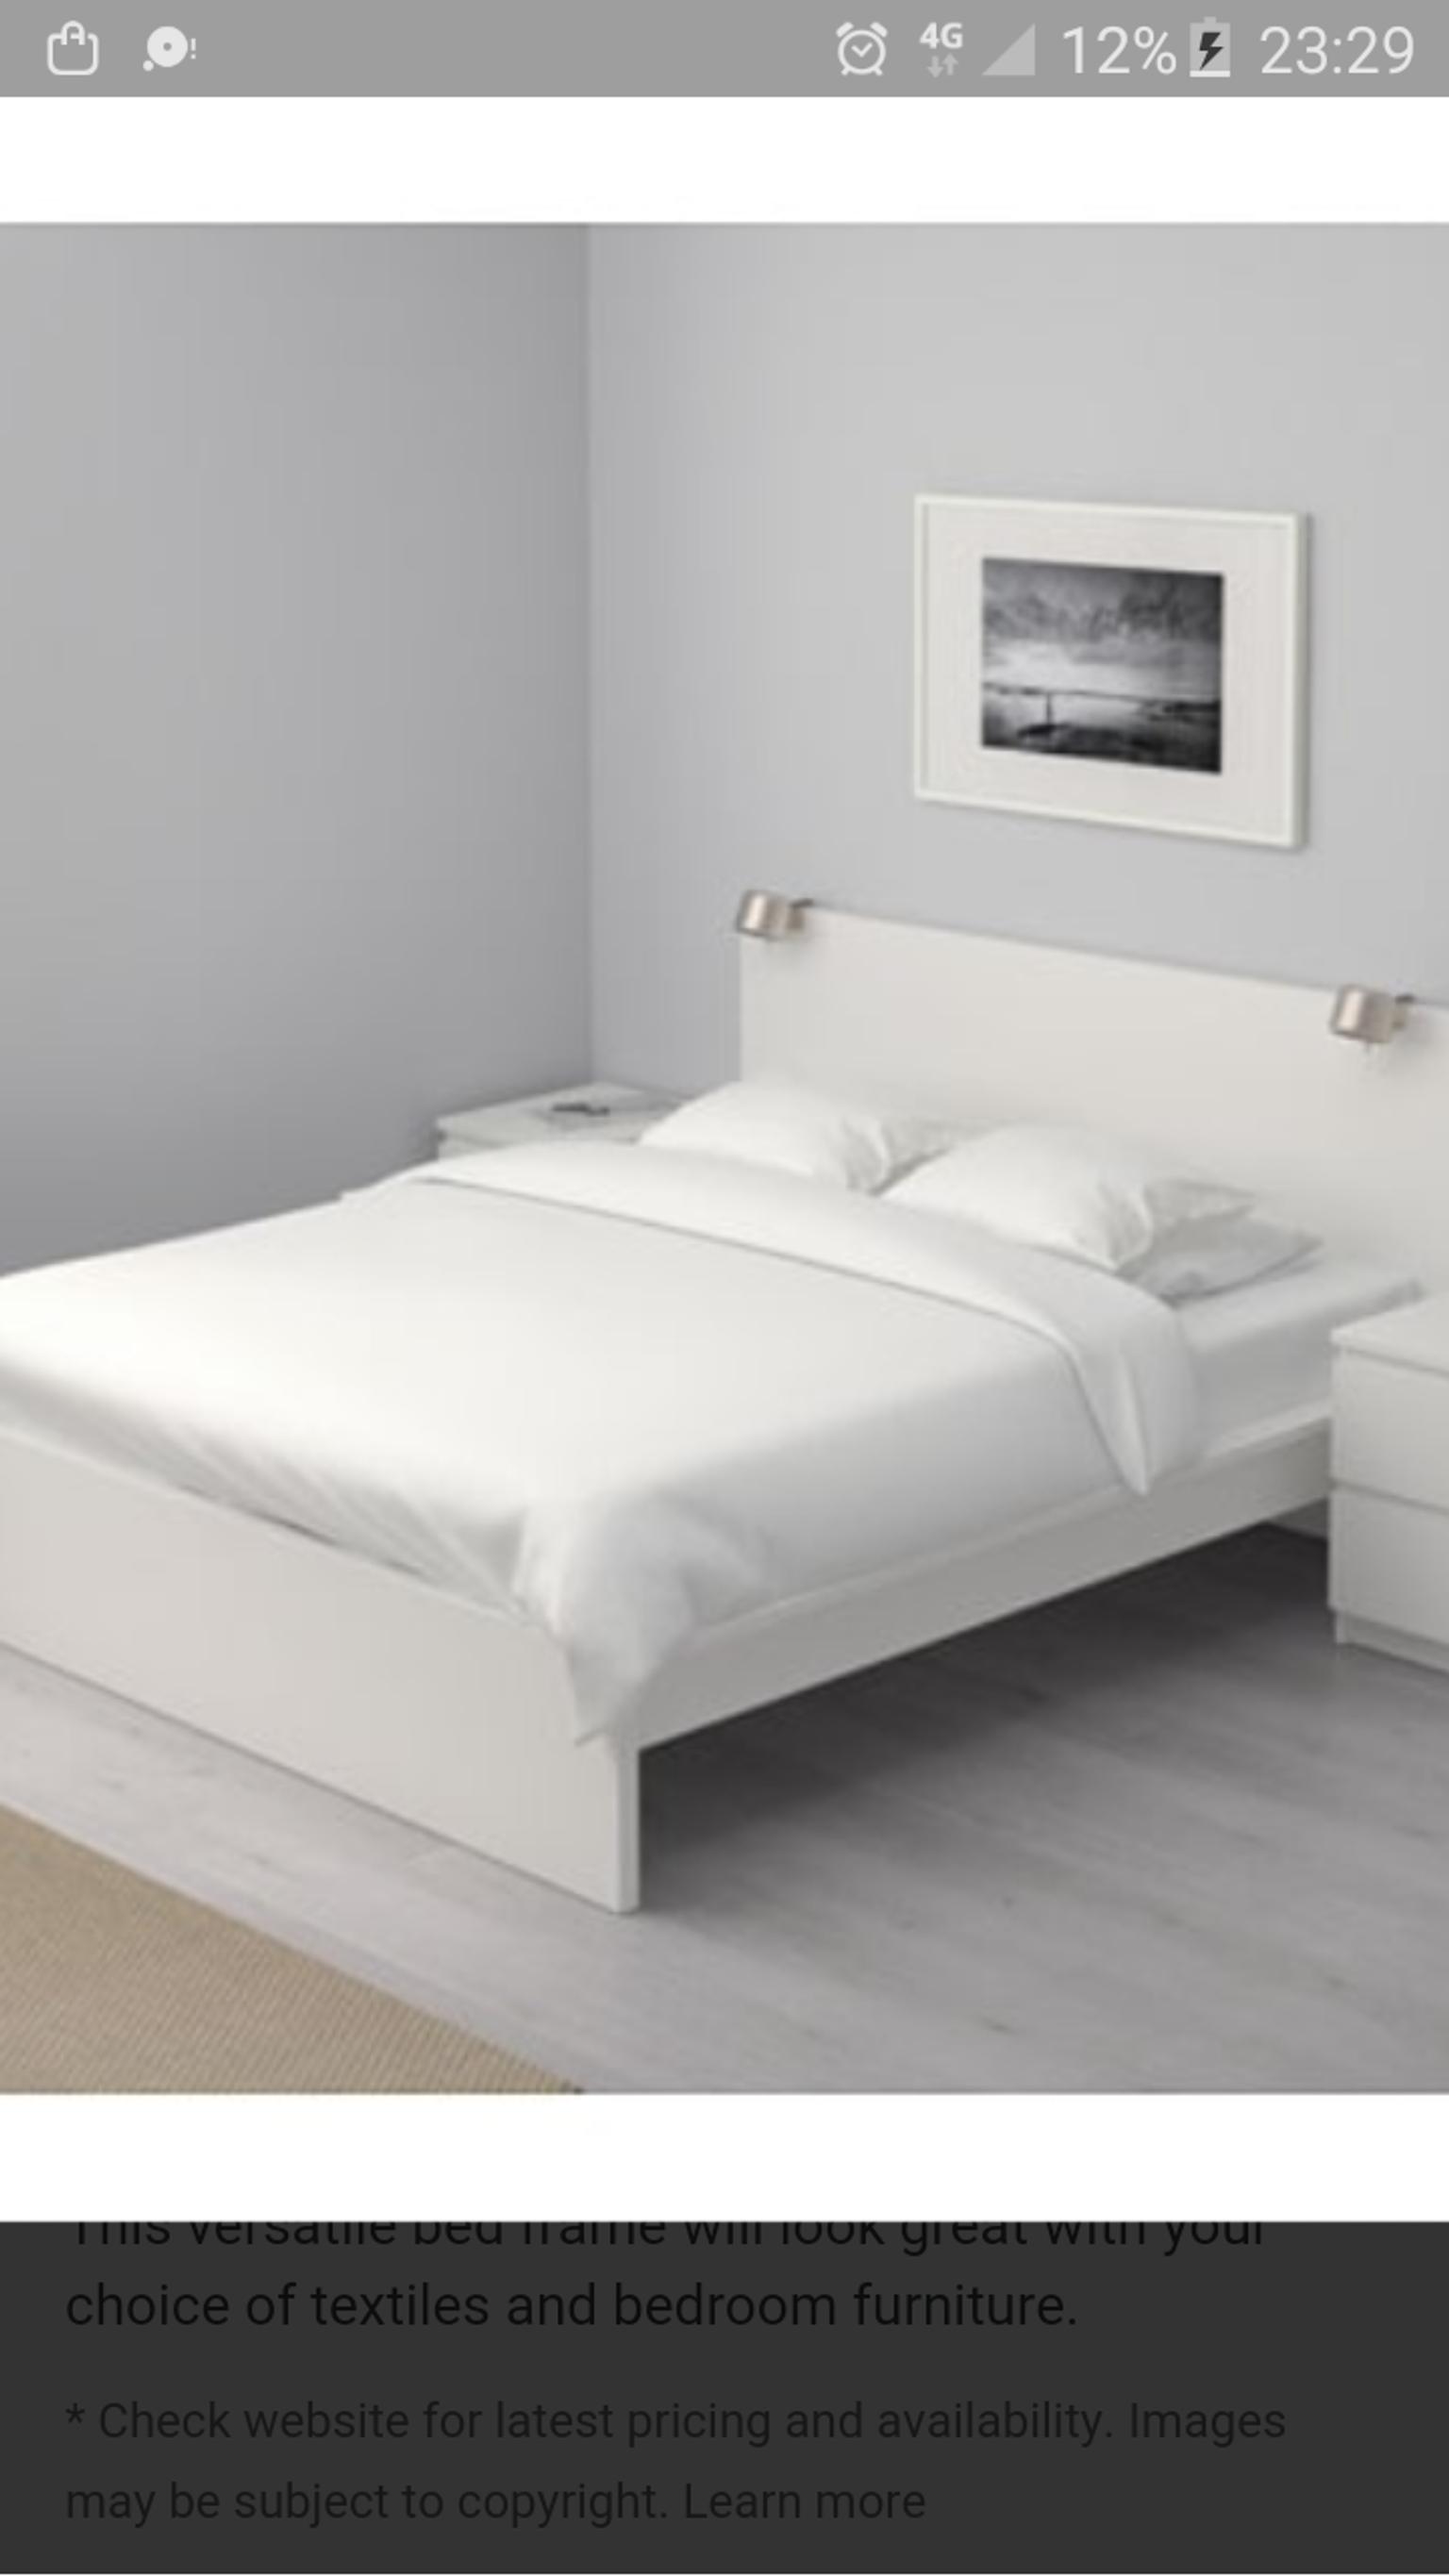 Ikea King Size Malm Bed In Sw1v, Ikea Malm King Size Bed Frame